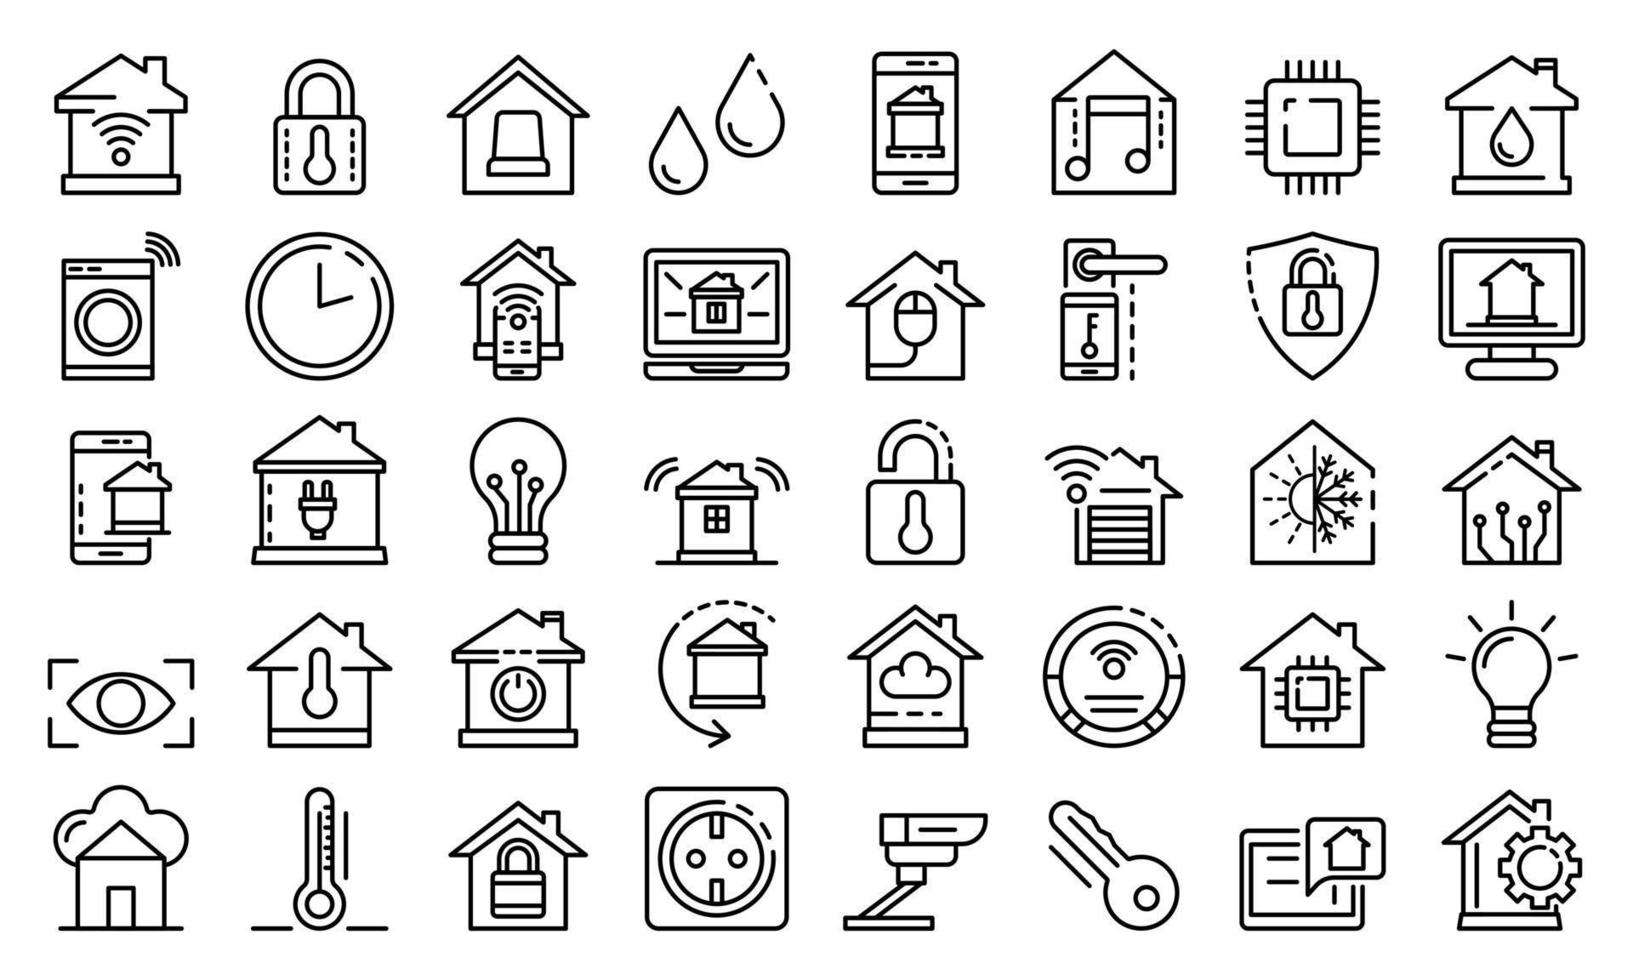 Smart home icons set, outline style vector